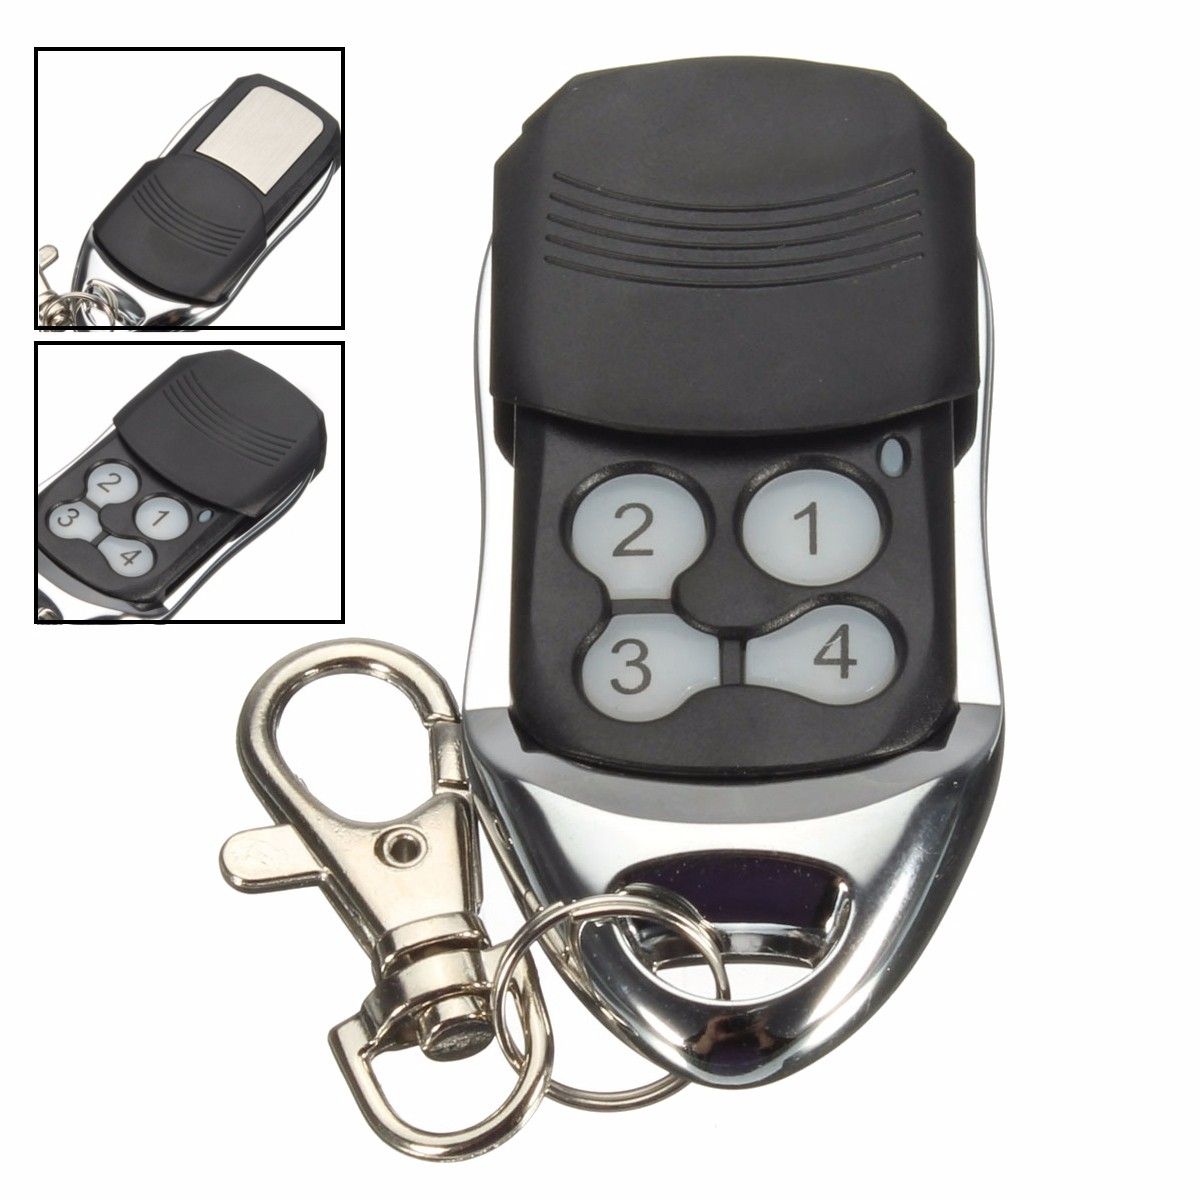 4-Button-433MHz-Black-Garage-Gate-Key-Remote-Control-Replacement-For-RCG12C-1062211